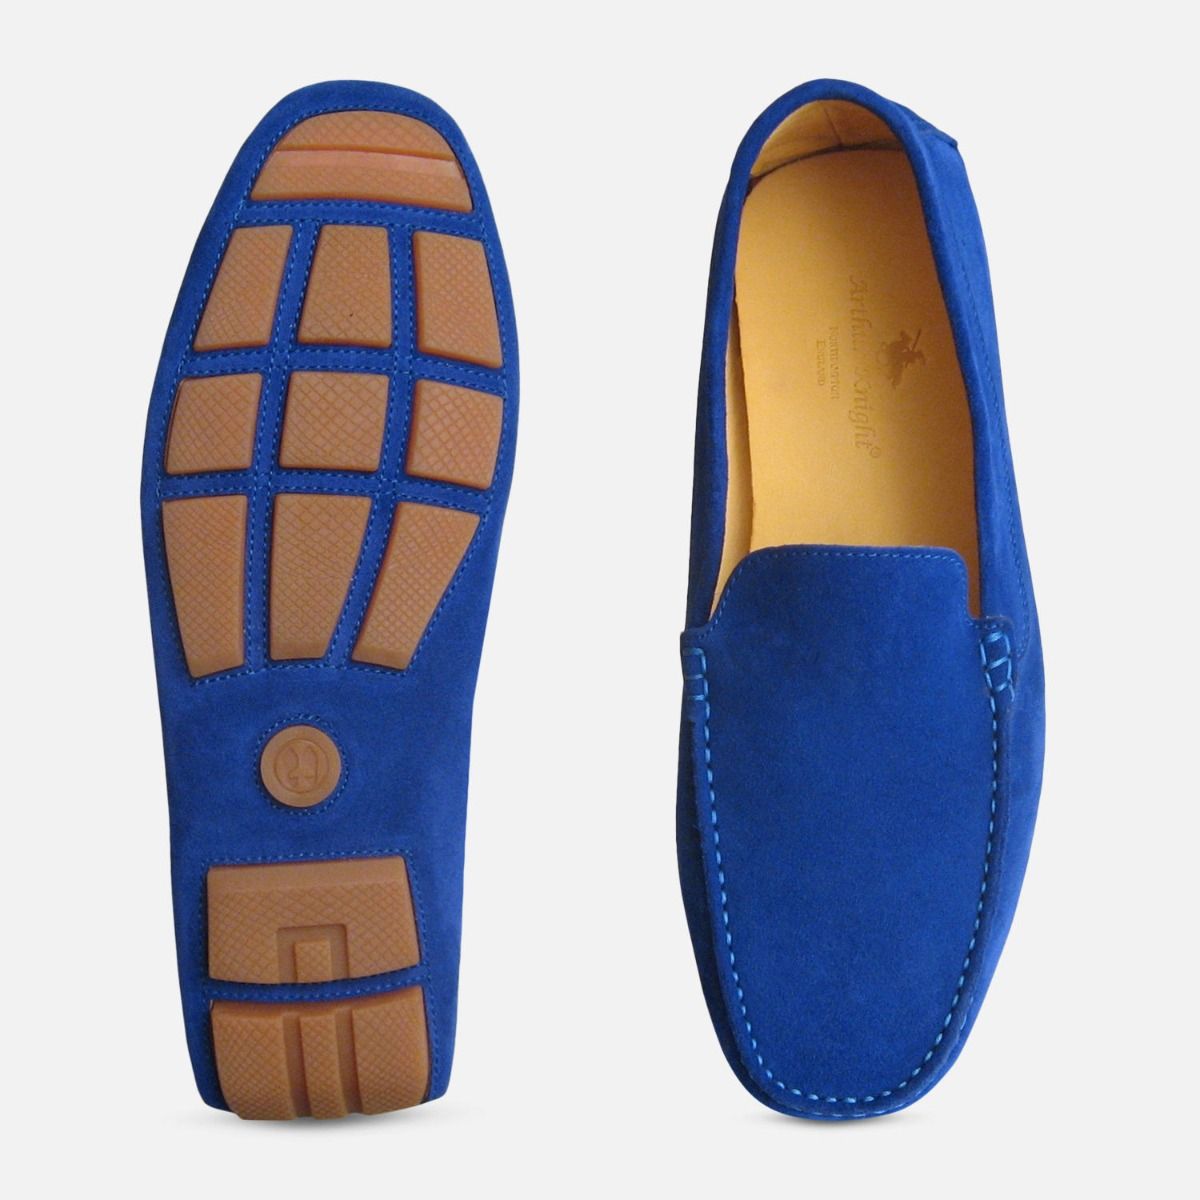 Blue Suede Moc Toe Driver Slip-On  Men Shoes Maricci New With Box #JT8008